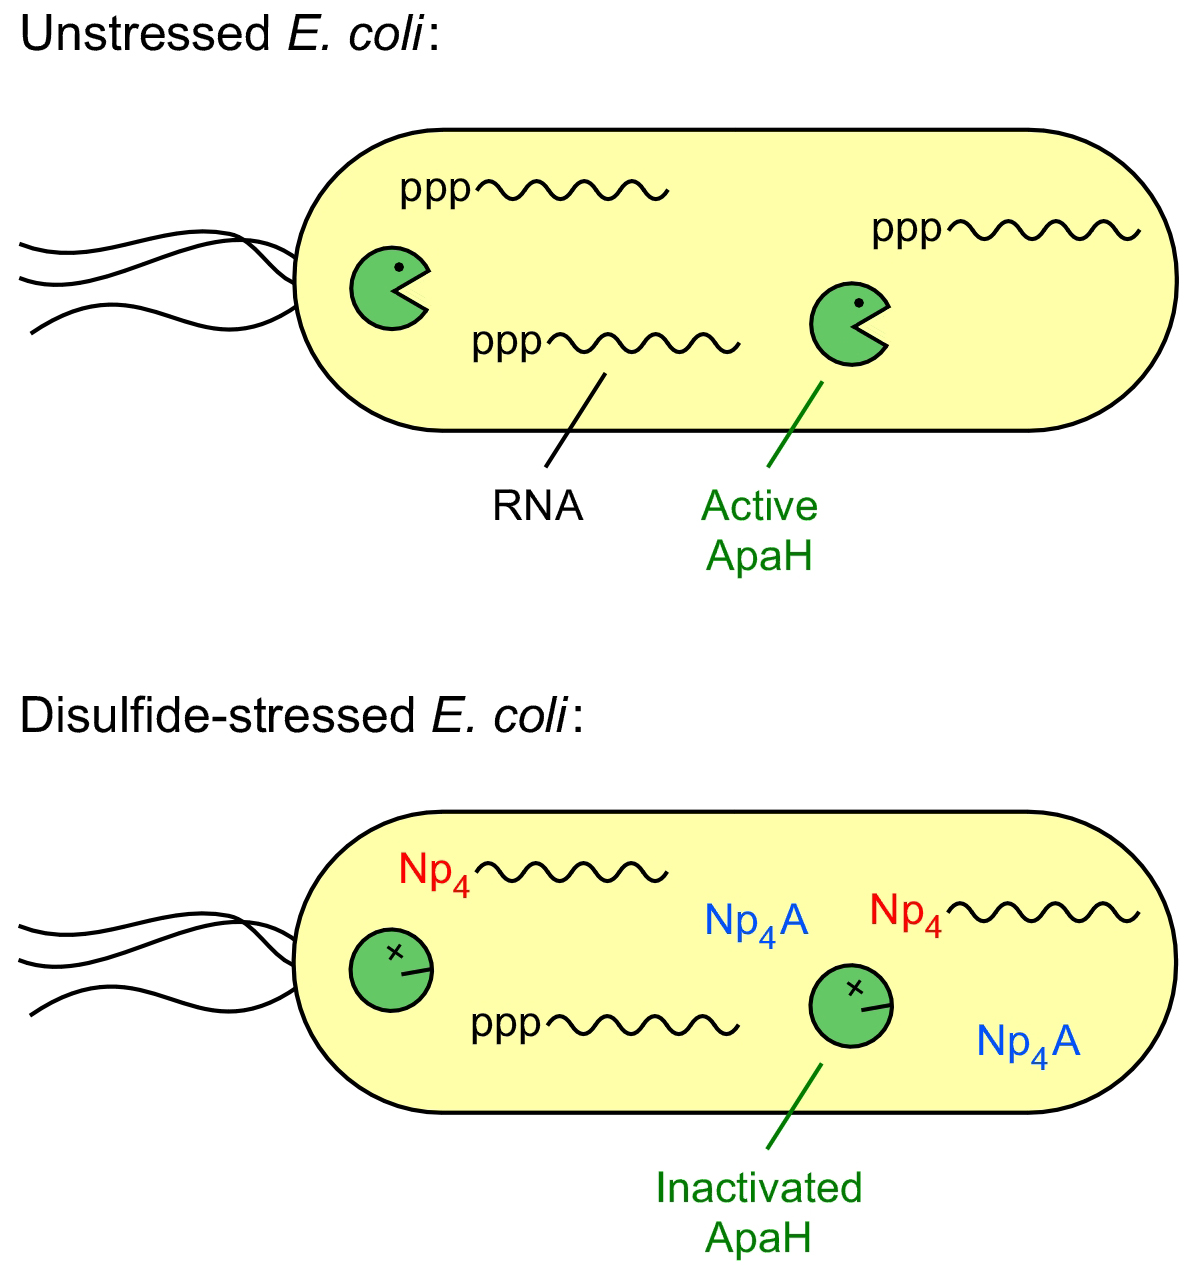 Unstressed E. coli Effects Active ApaH, Whereas Stressed E. coli Effects Inactivaed ApaH